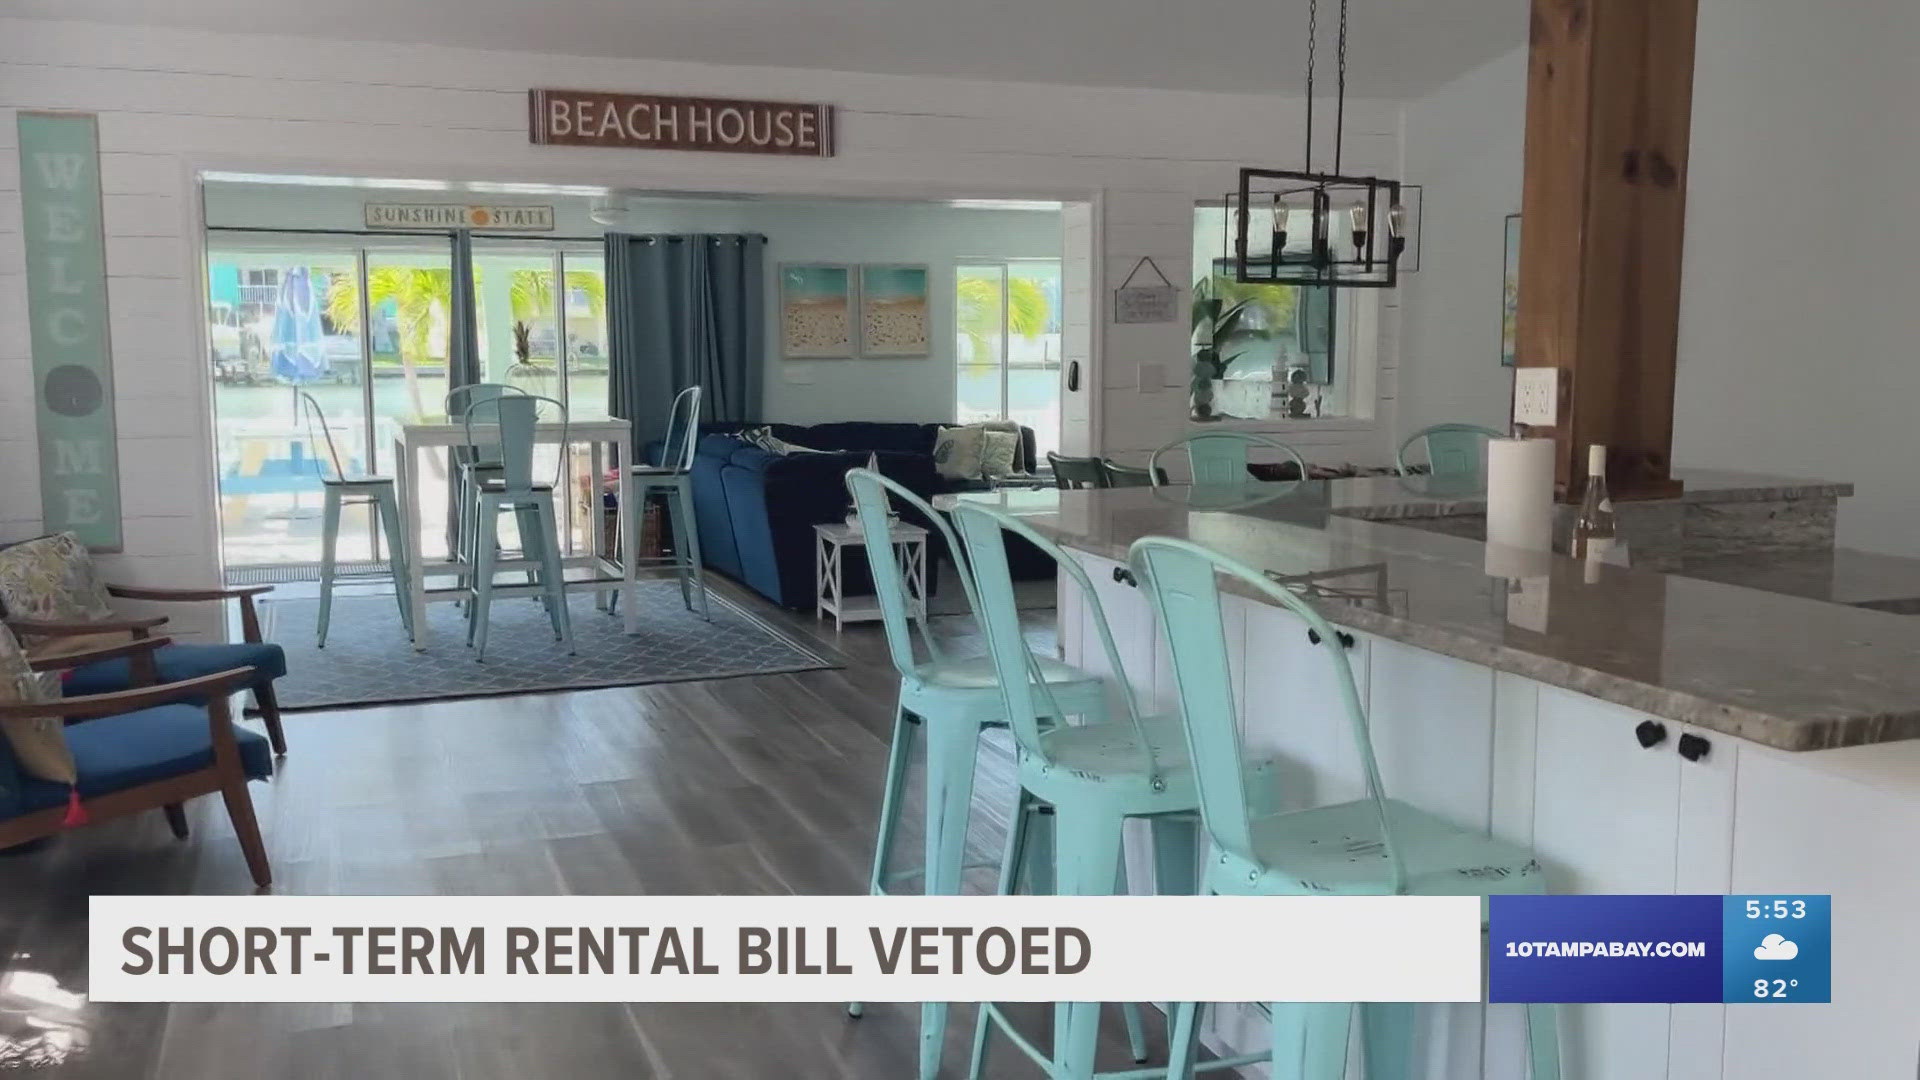 Gov. Ron DeSantis on Thursday vetoed a measure aimed at regulating vacation rentals, saying the proposal would create “bureaucratic red tape” for local officials.